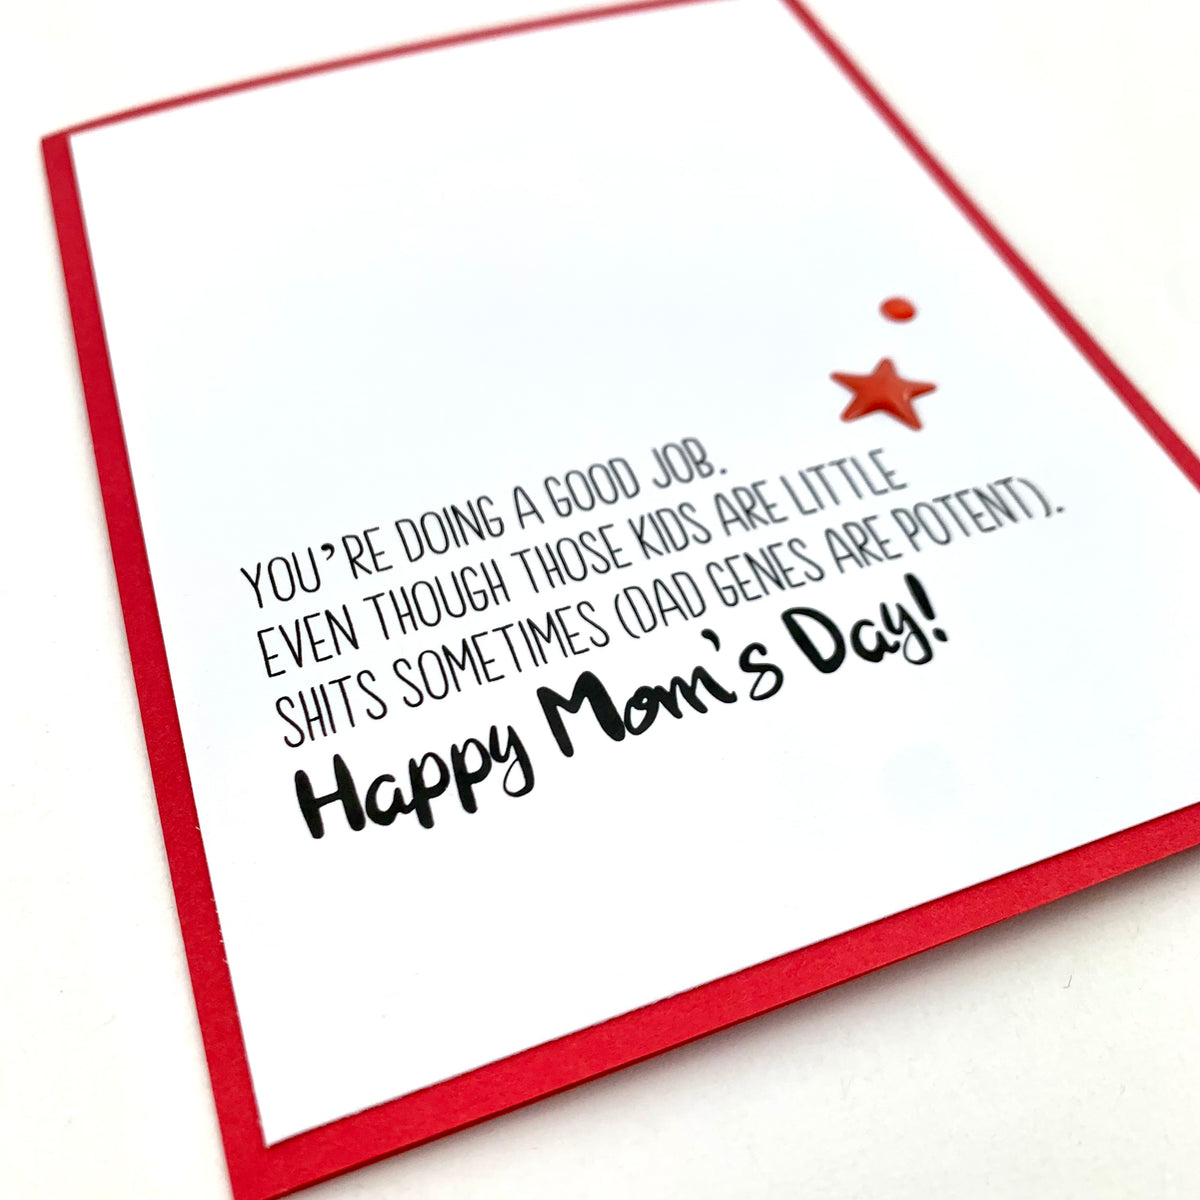 Mother’s Day Kids are Little Shits-Dad Genes are Potent card